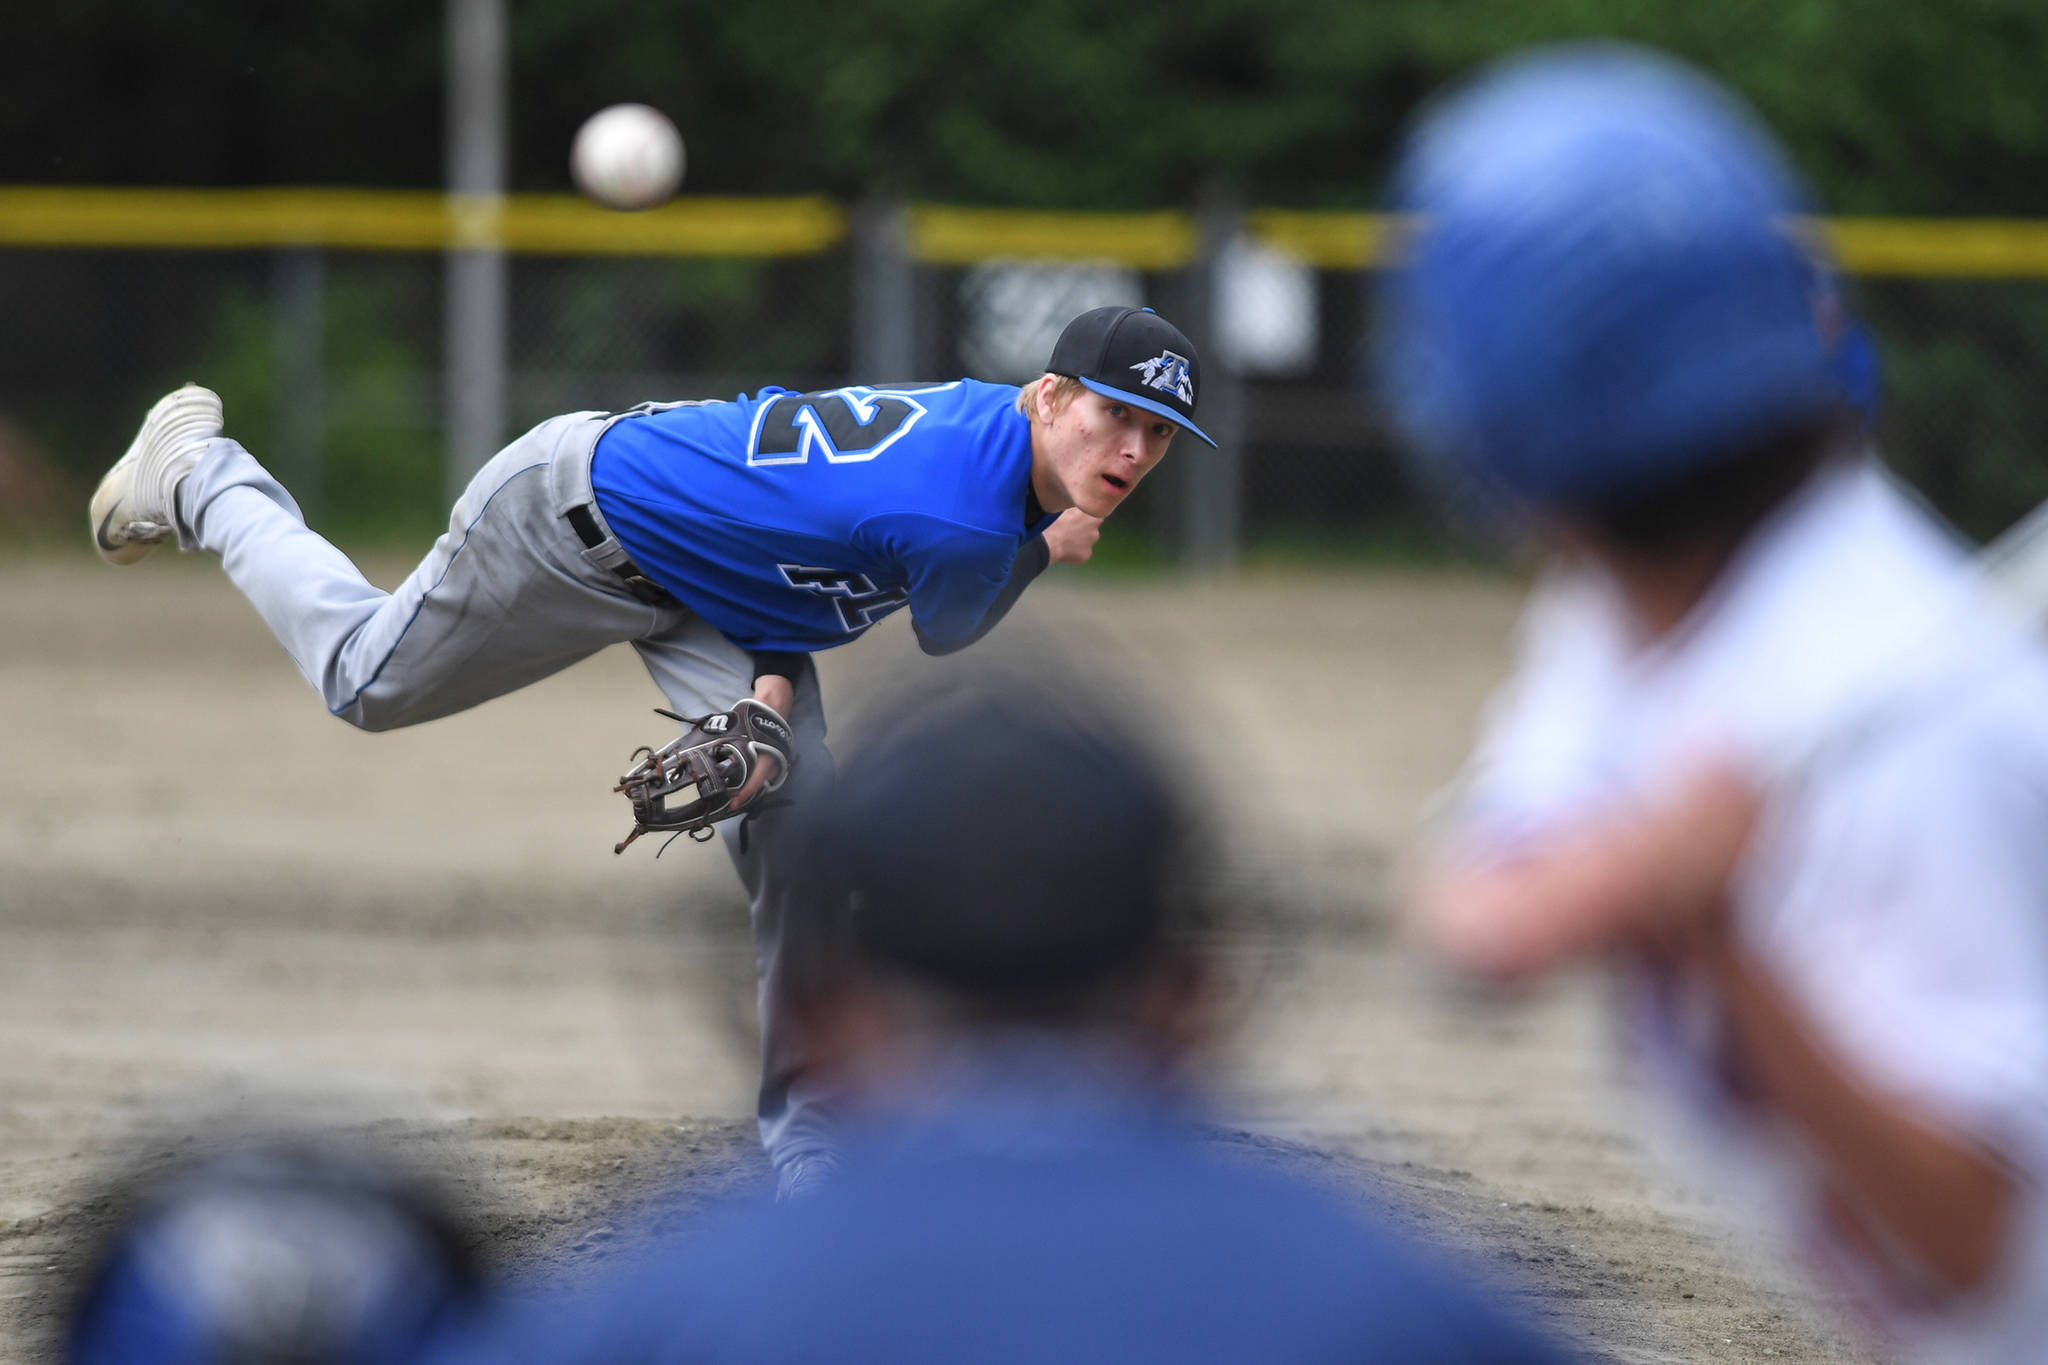 Thunder Mountain’s Stone Morgan pitches against Sitka’s Eman Barragan during the Region V Baseball Championship at Adair-Kennedy Memorial Park on Friday, May 24, 2019. TMHS lost 1-7. (Michael Penn | Juneau Empire)